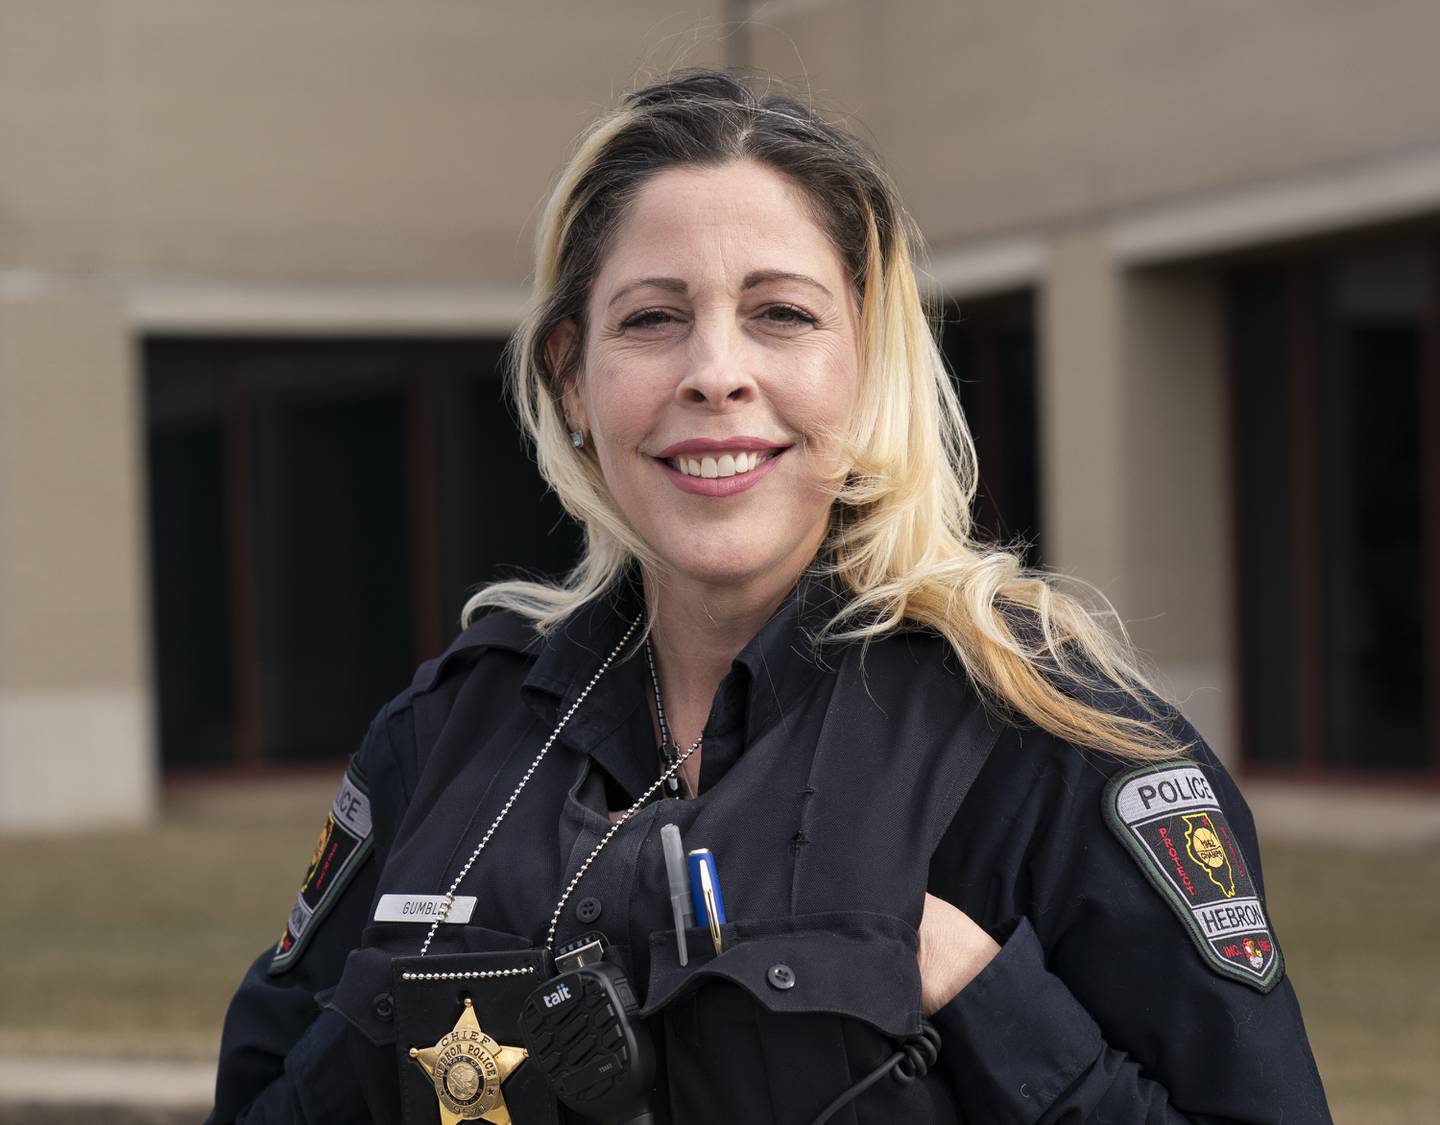 Juanita Gumble, Chief of Police, Hebron Police Department, photographed outside the McHenry County Government Center on Thursday, March 2, 2023 in Woodstock. Ryan Rayburn for Shaw Local